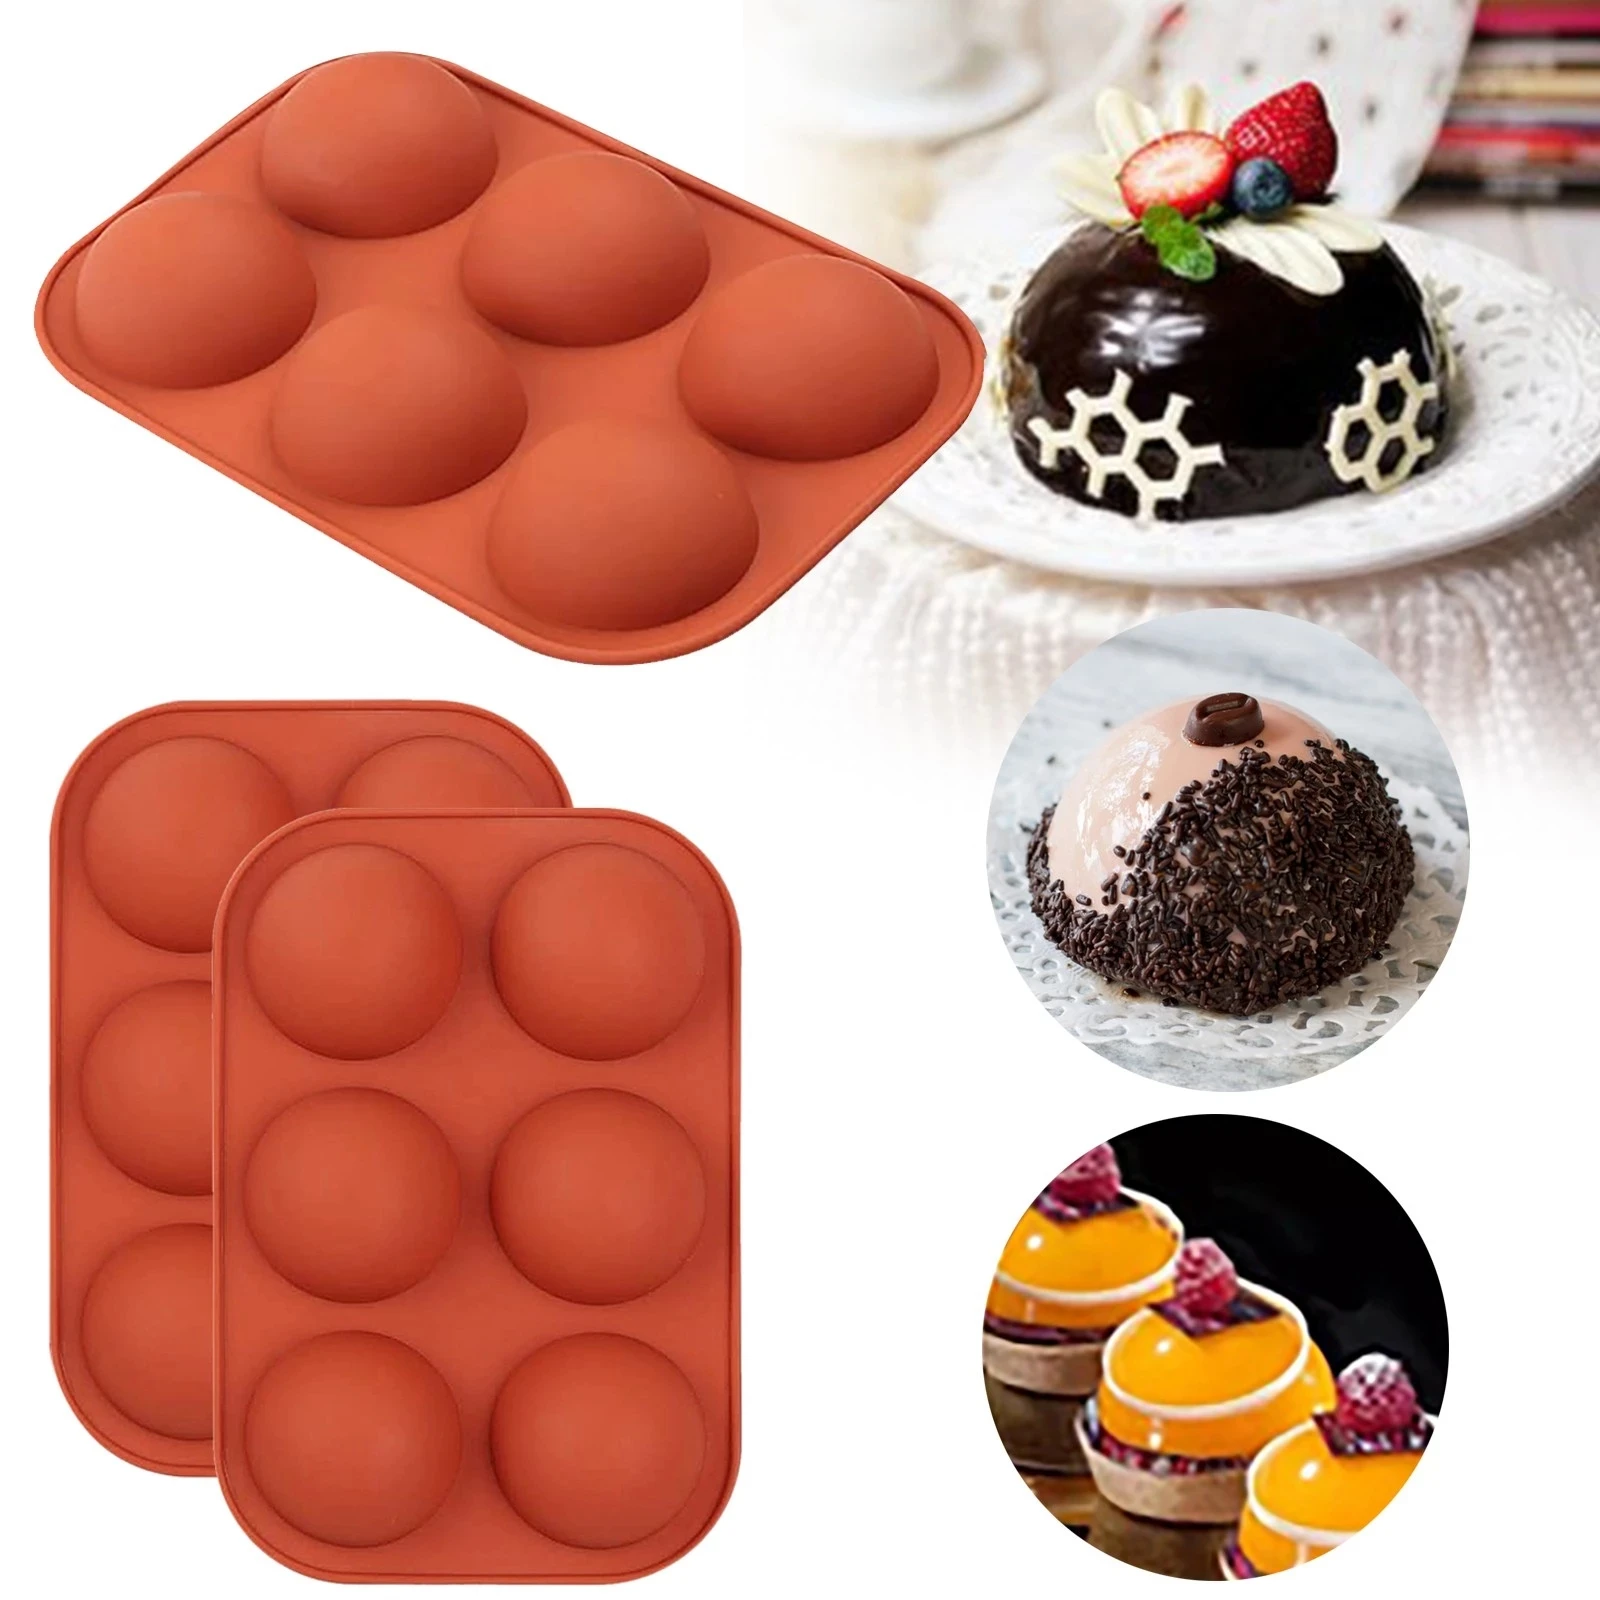 

Half Sphere Soap Molds Bakeware Cake Tools Pudding Jelly Chocolate Fondant Mould Ball Biscuit Silicone Baking Moulds, Brick red ,green,blue,pink